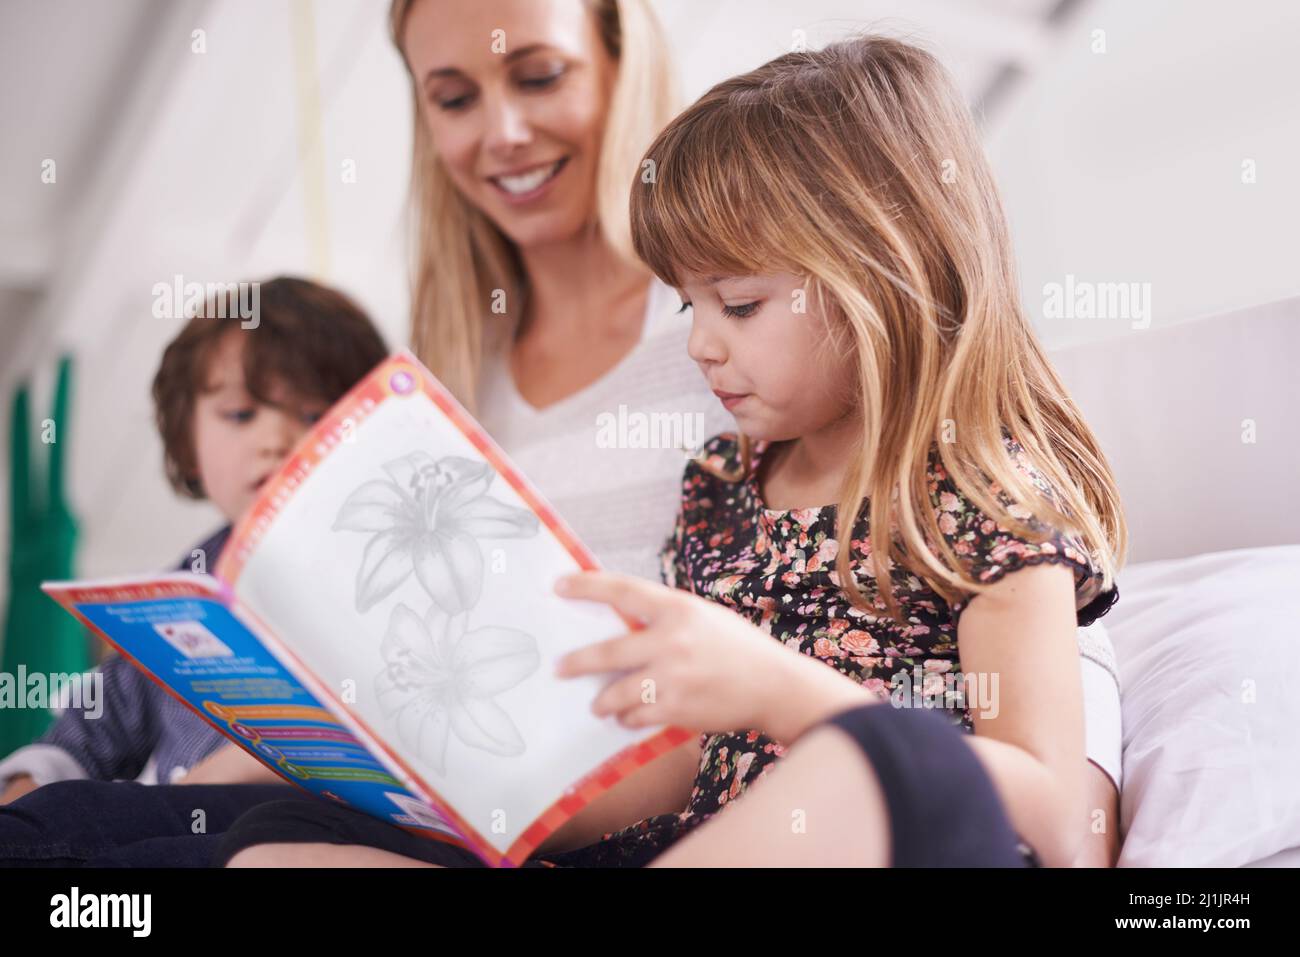 Taking a reading adventure together. Shot of a mother reading with her children at home. Stock Photo